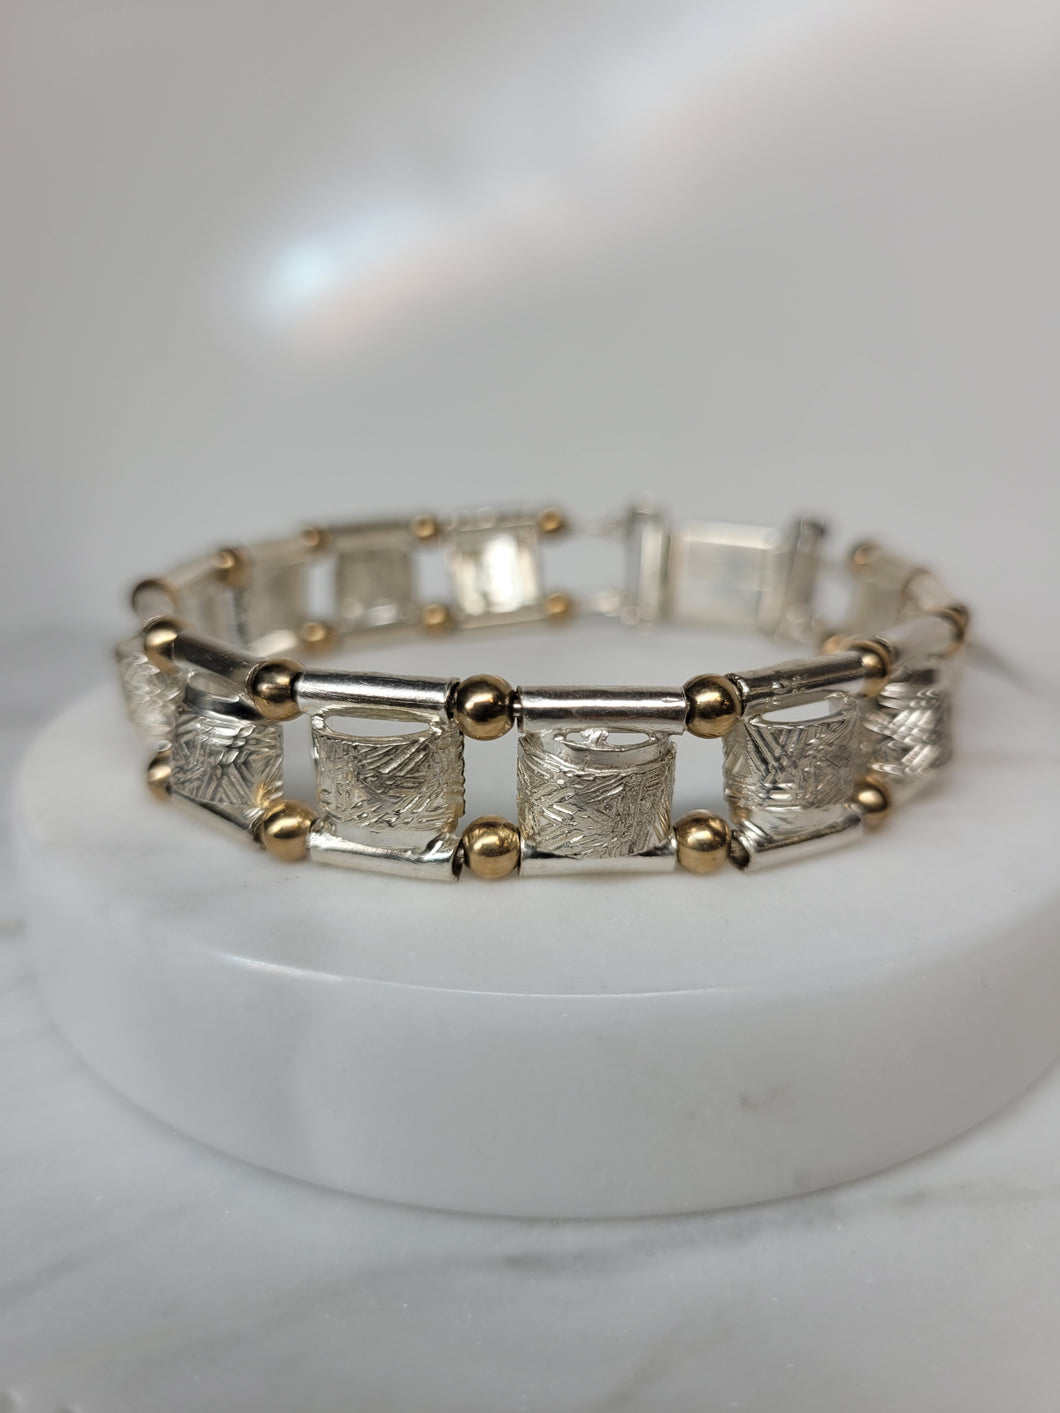 Textured sterling silver bracelet with 14K gold bead accents